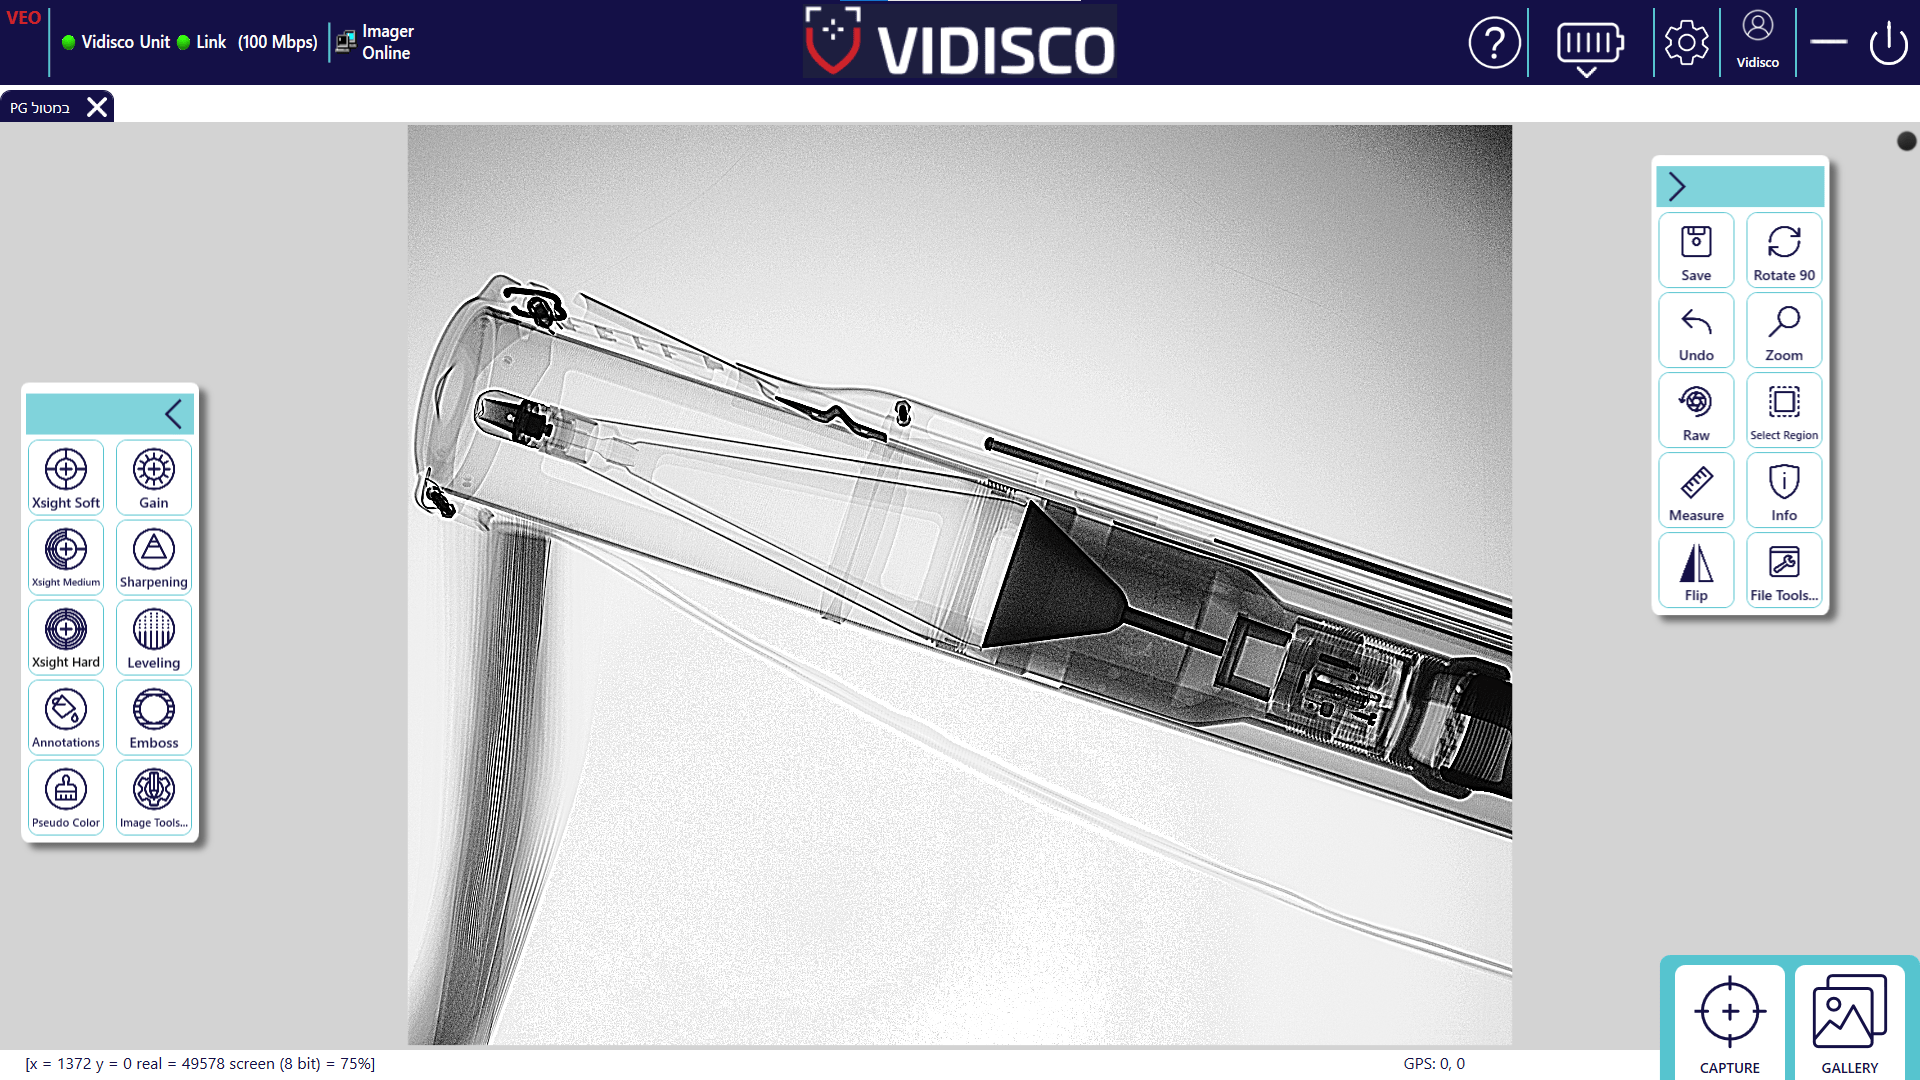 Vidisco Unveils Portable Digital X-Ray system for Detection of Live Ammunition in Explosive Ordnance Disposal